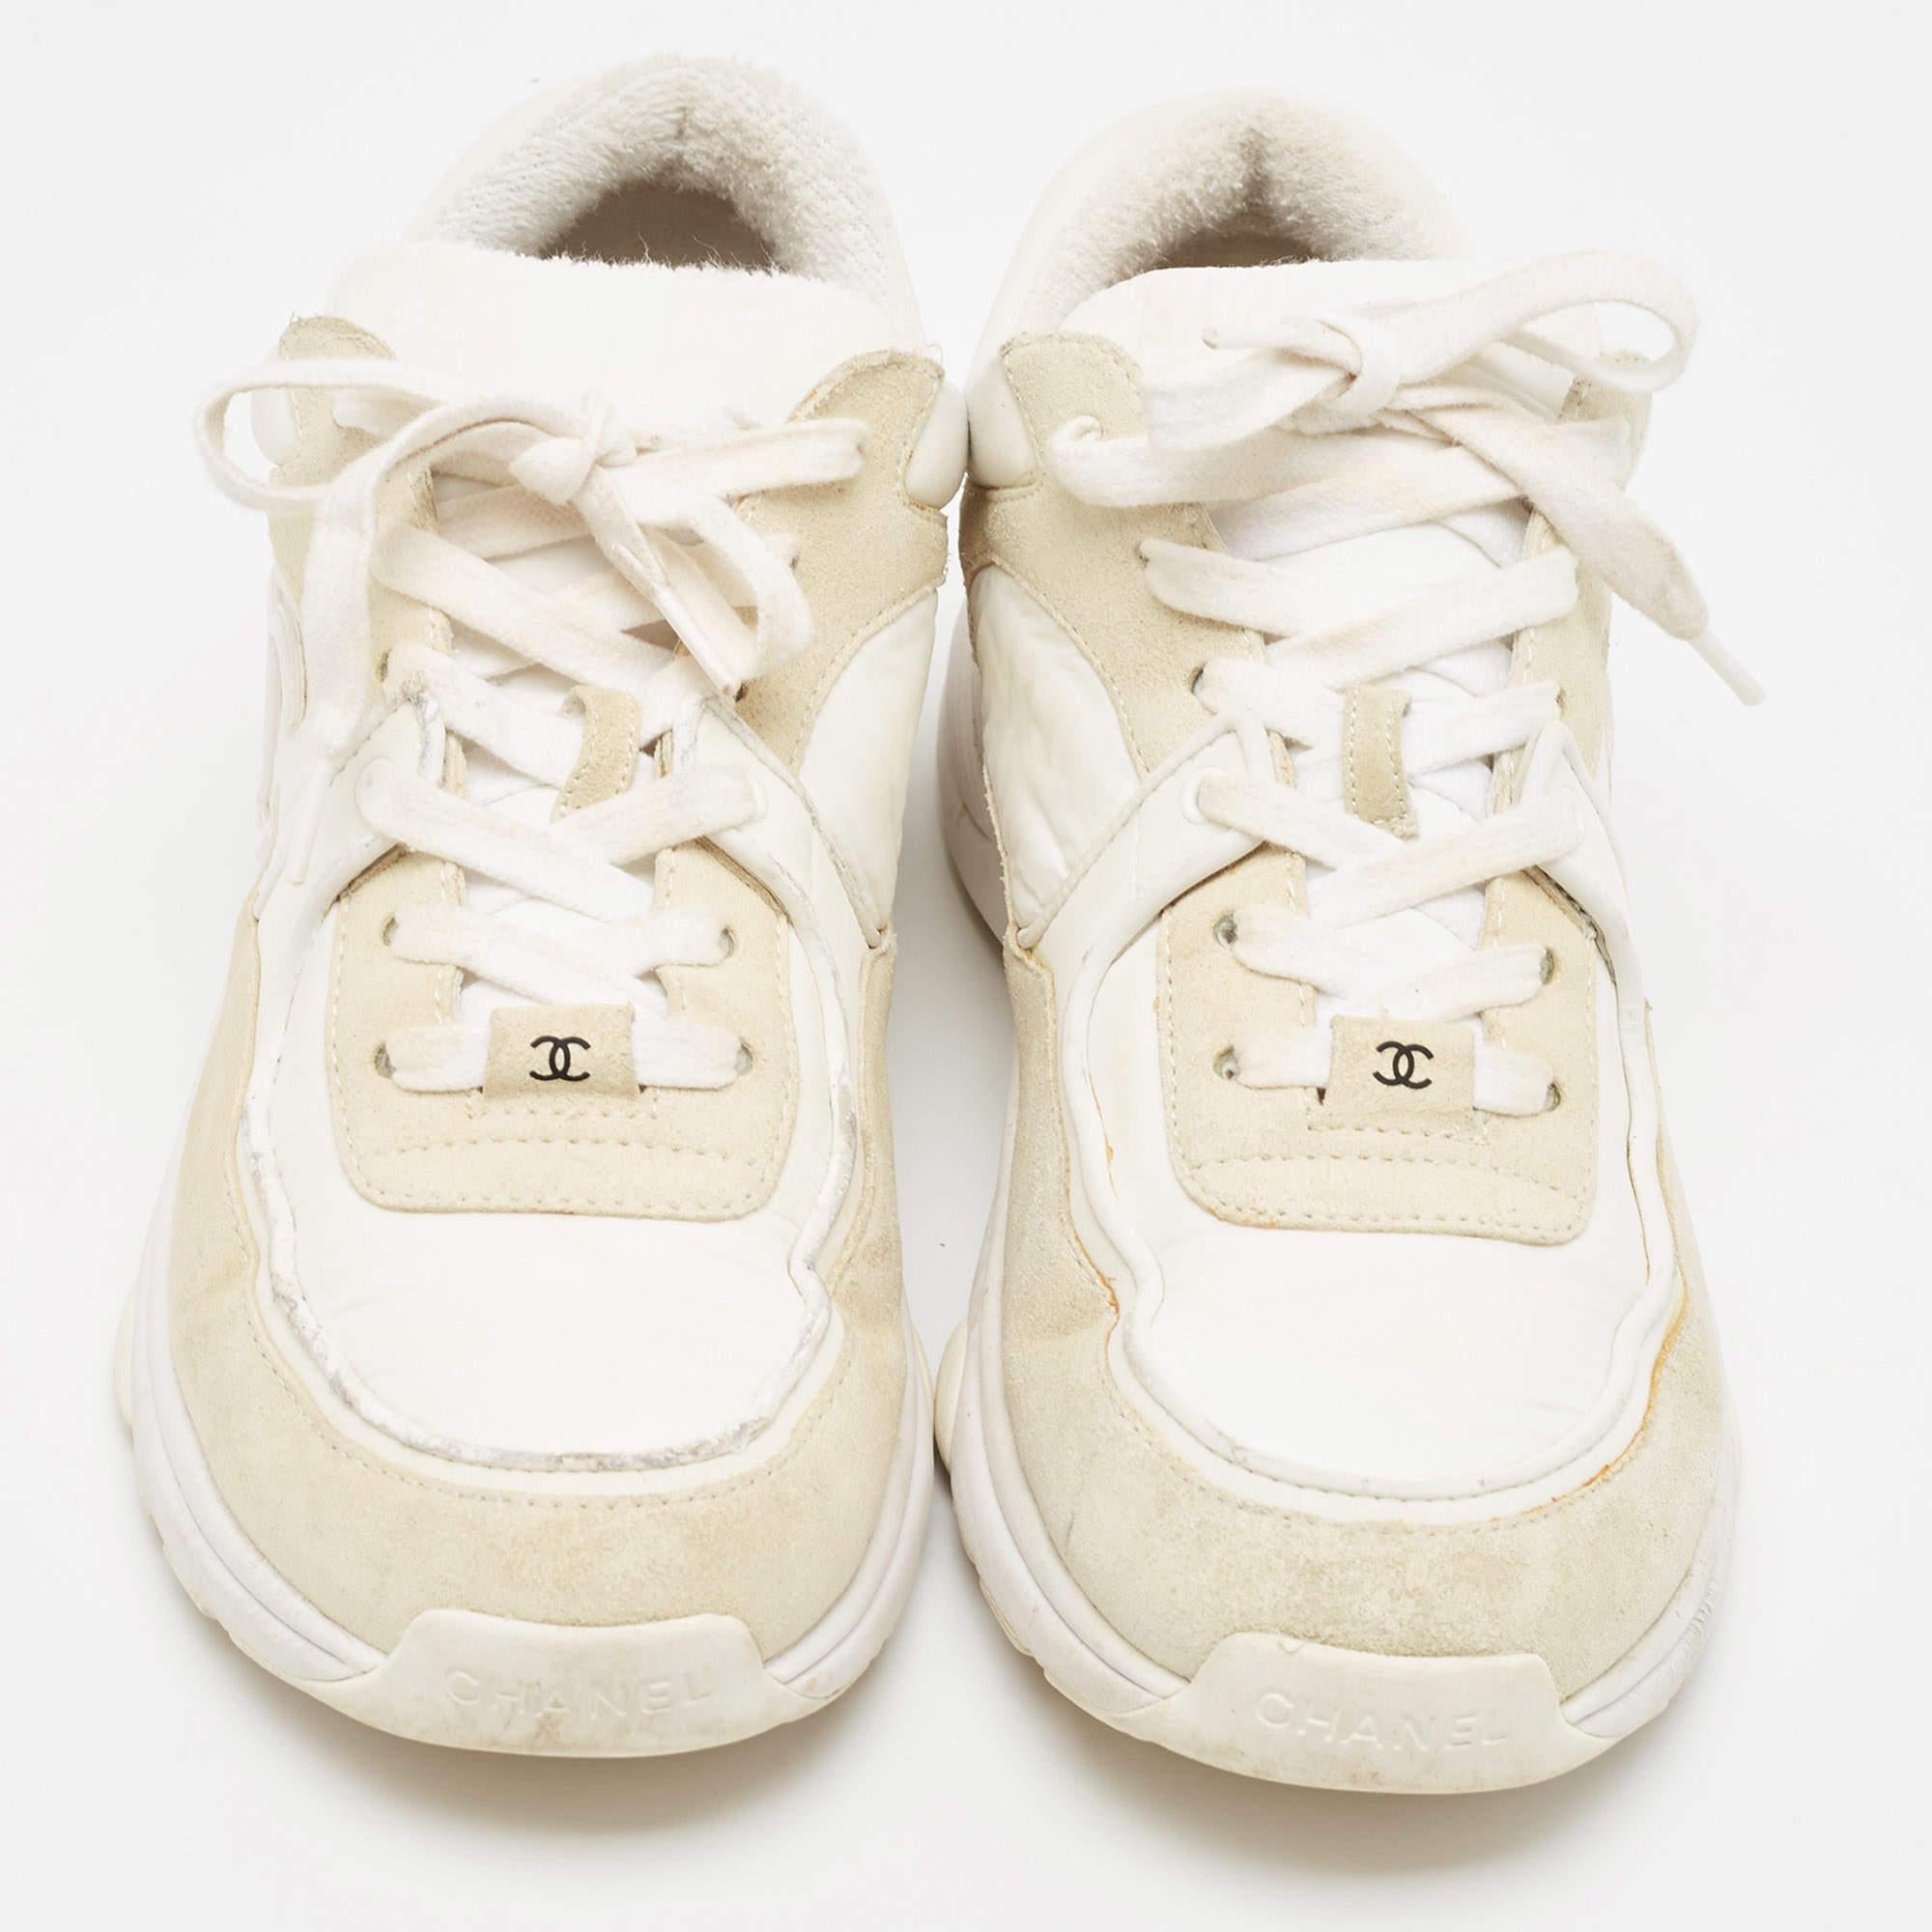 Designed into a chunky size, these Chanel sneakers are not just stylish in appeal but also comfortable to wear. Crafted from quality materials, they are designed with CC logos on the sides. Finished off with laces on the vamps, these kicks still top